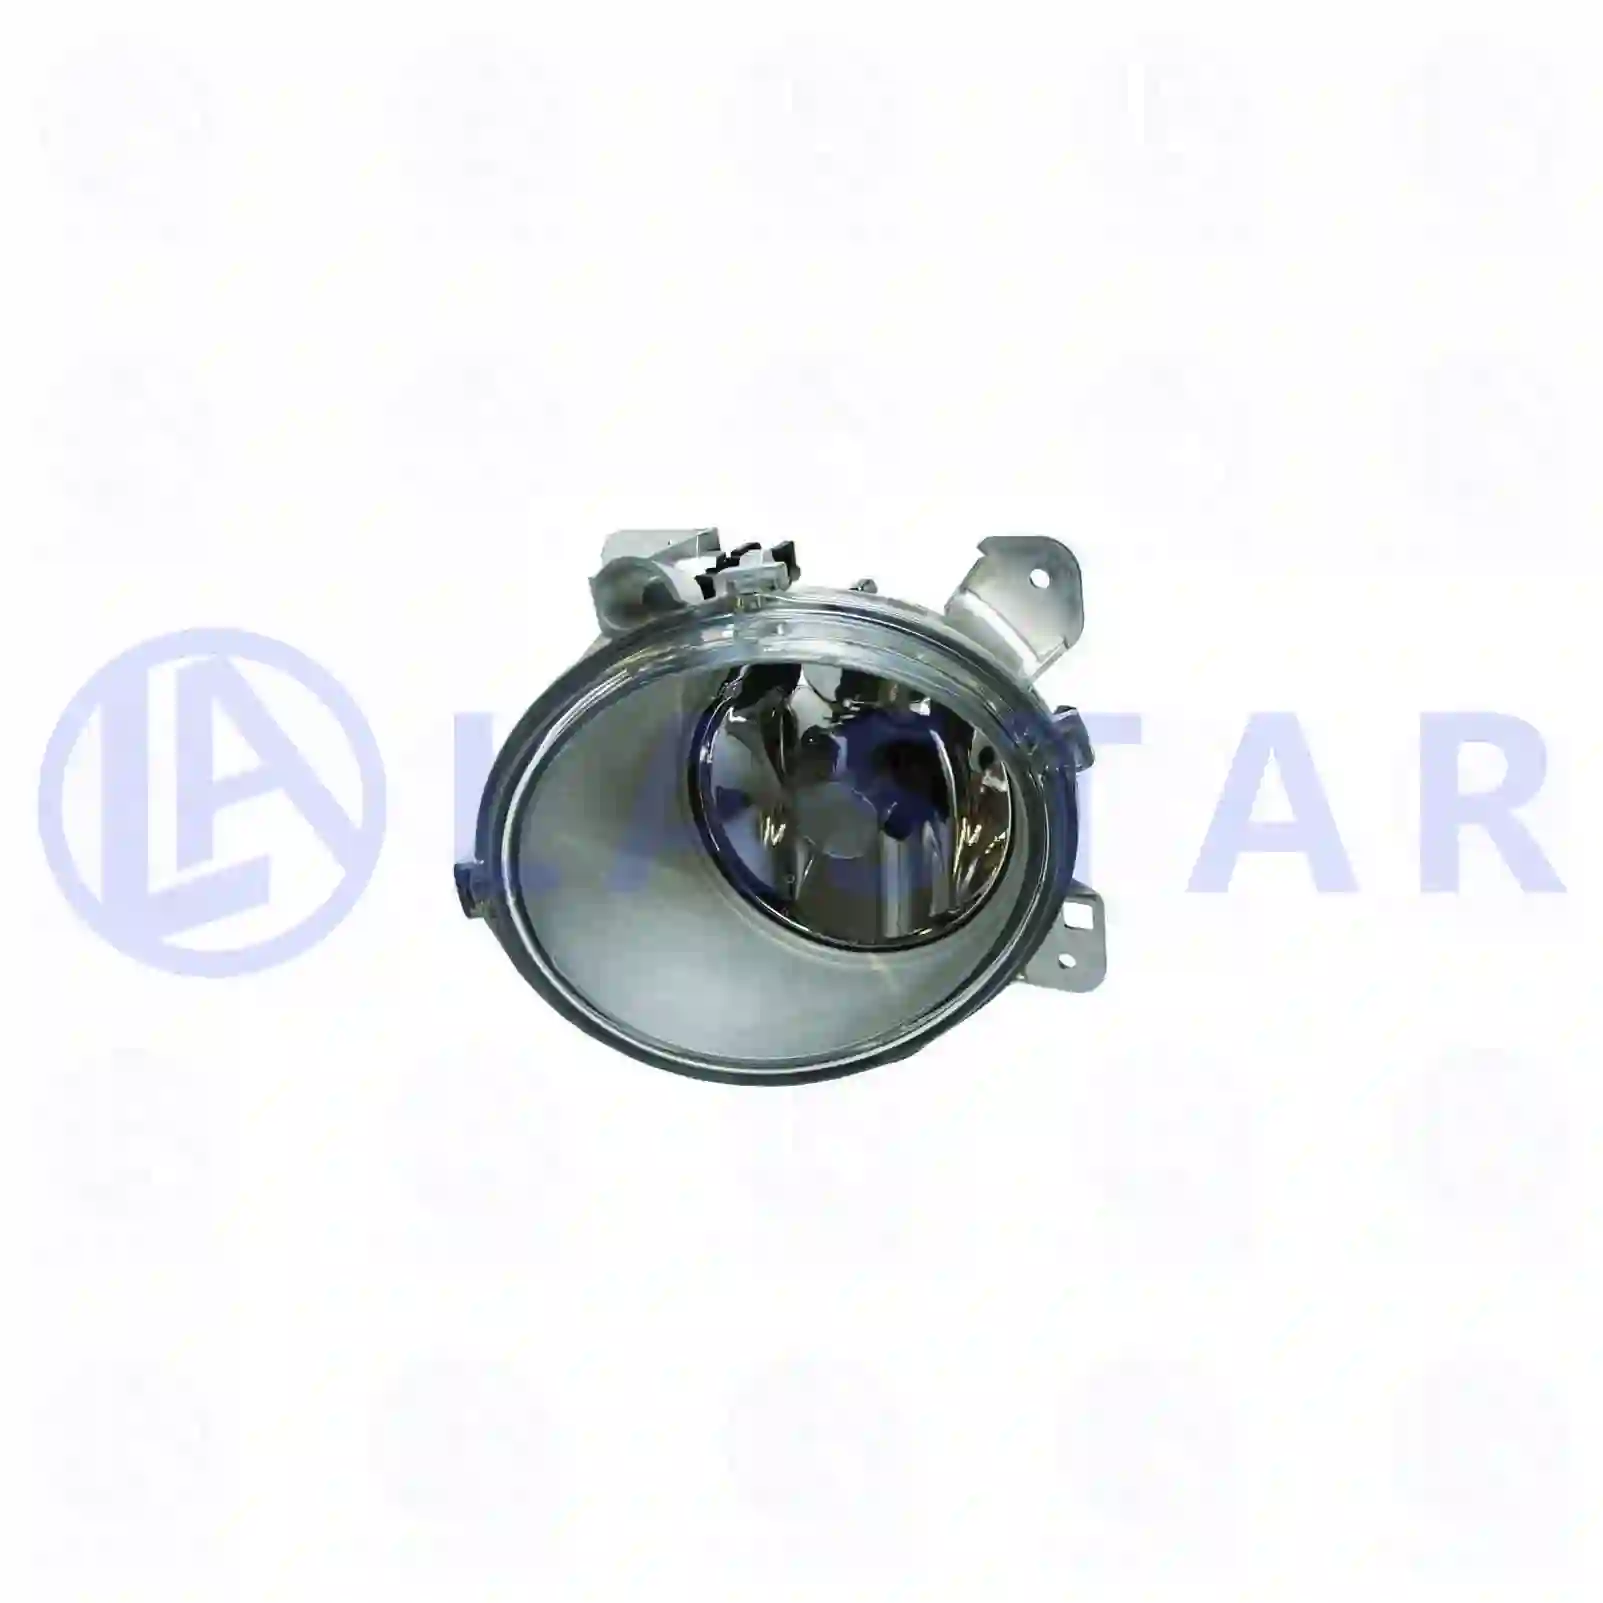 Fog lamp, bumper, right, without bulb, 77713250, 1446356, 1511543, 1852573, 1852578, 2080689, ZG20412-0008 ||  77713250 Lastar Spare Part | Truck Spare Parts, Auotomotive Spare Parts Fog lamp, bumper, right, without bulb, 77713250, 1446356, 1511543, 1852573, 1852578, 2080689, ZG20412-0008 ||  77713250 Lastar Spare Part | Truck Spare Parts, Auotomotive Spare Parts